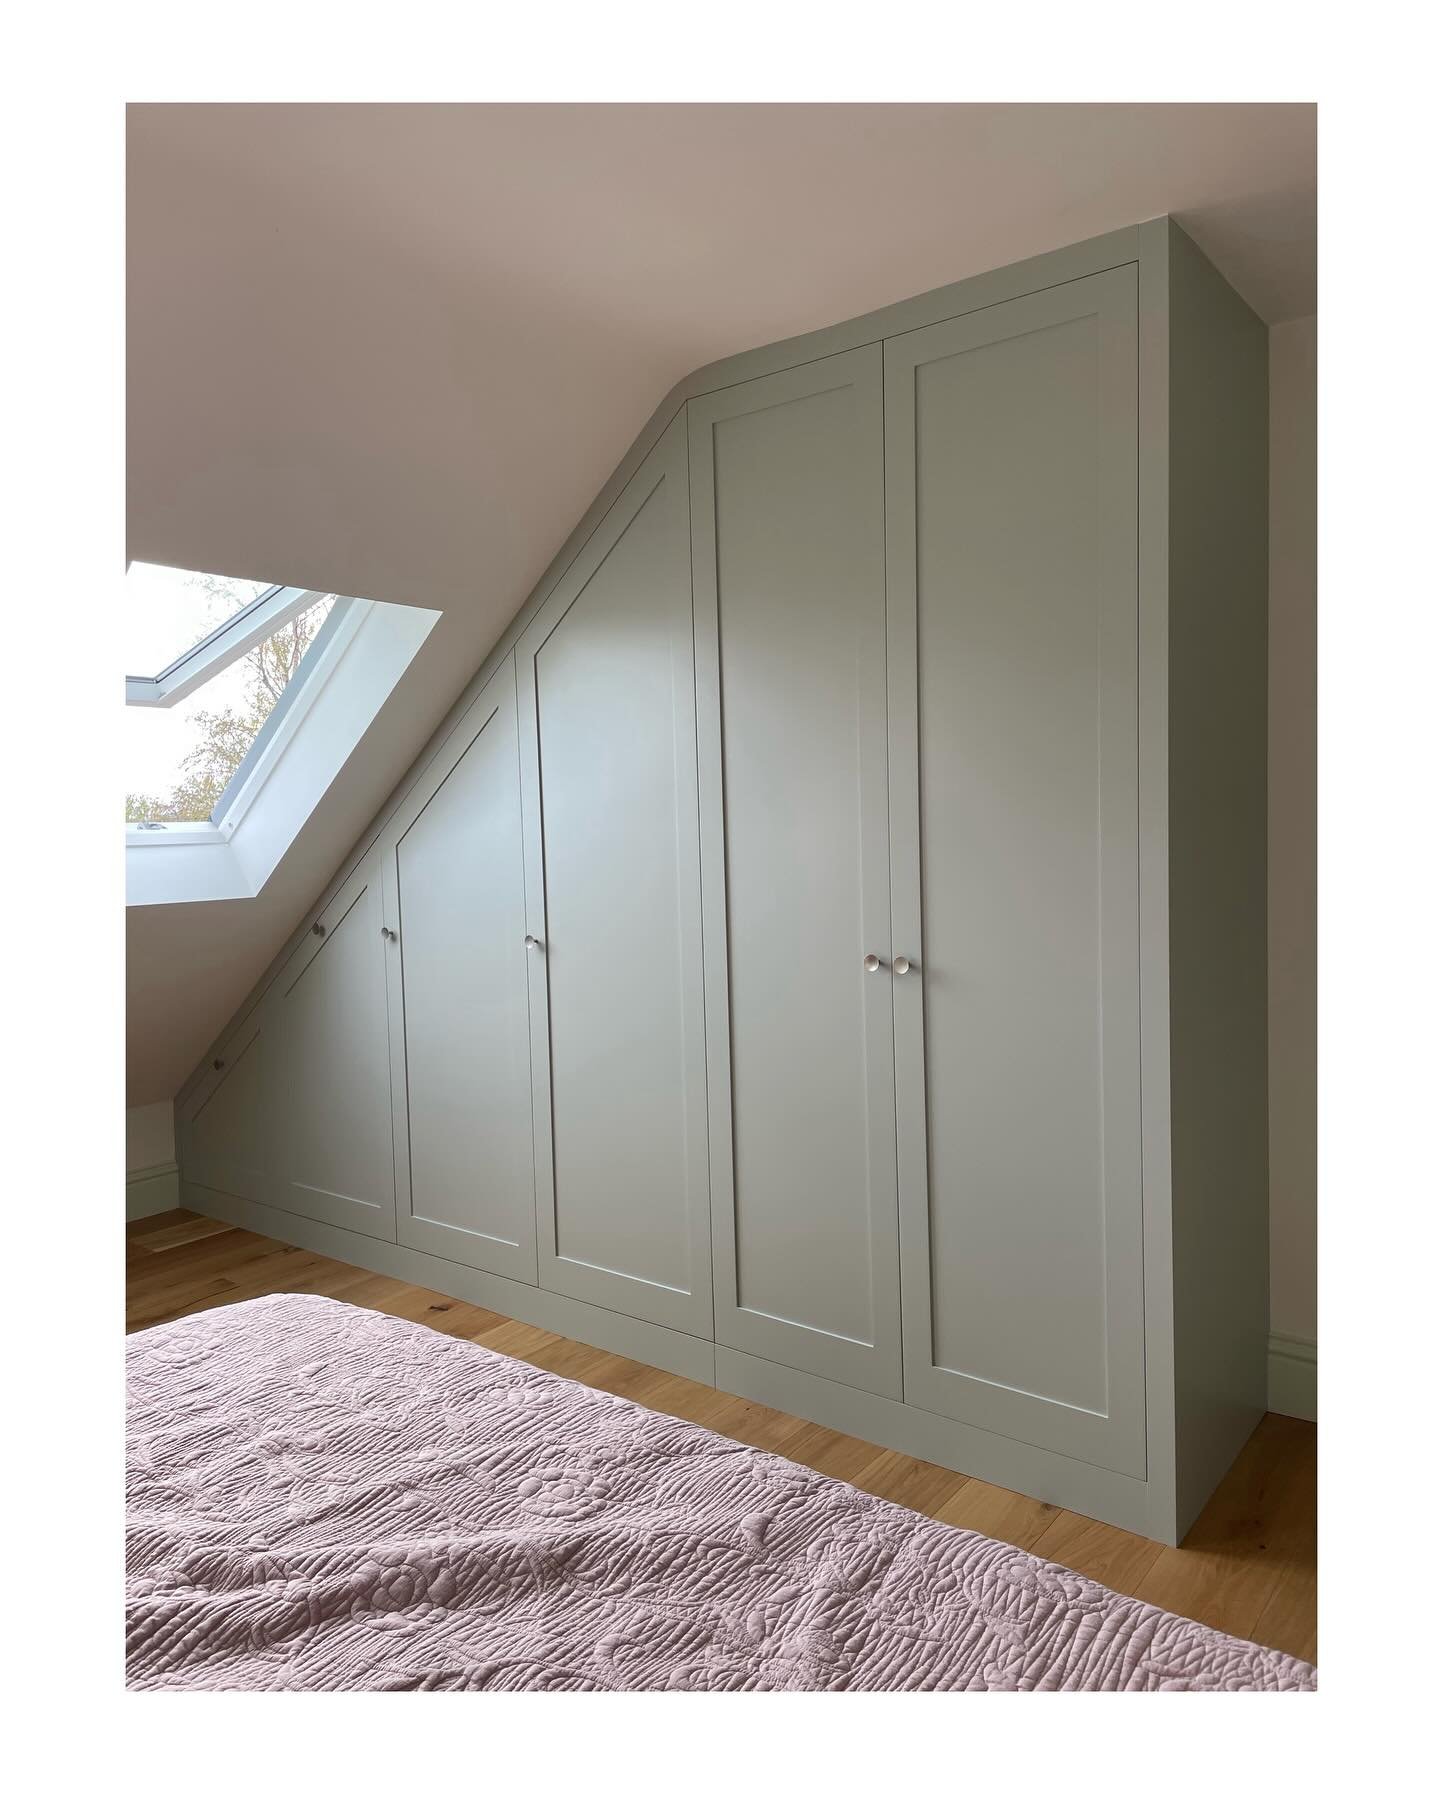 W A R D R O B E

Freshly fitted shaker style wardrobe with a spray painted exterior and an oak interior. 
The brief was to make use of the dead space in the corner of the room, so I decided to make pull out shoe racks in the lower two sections of the